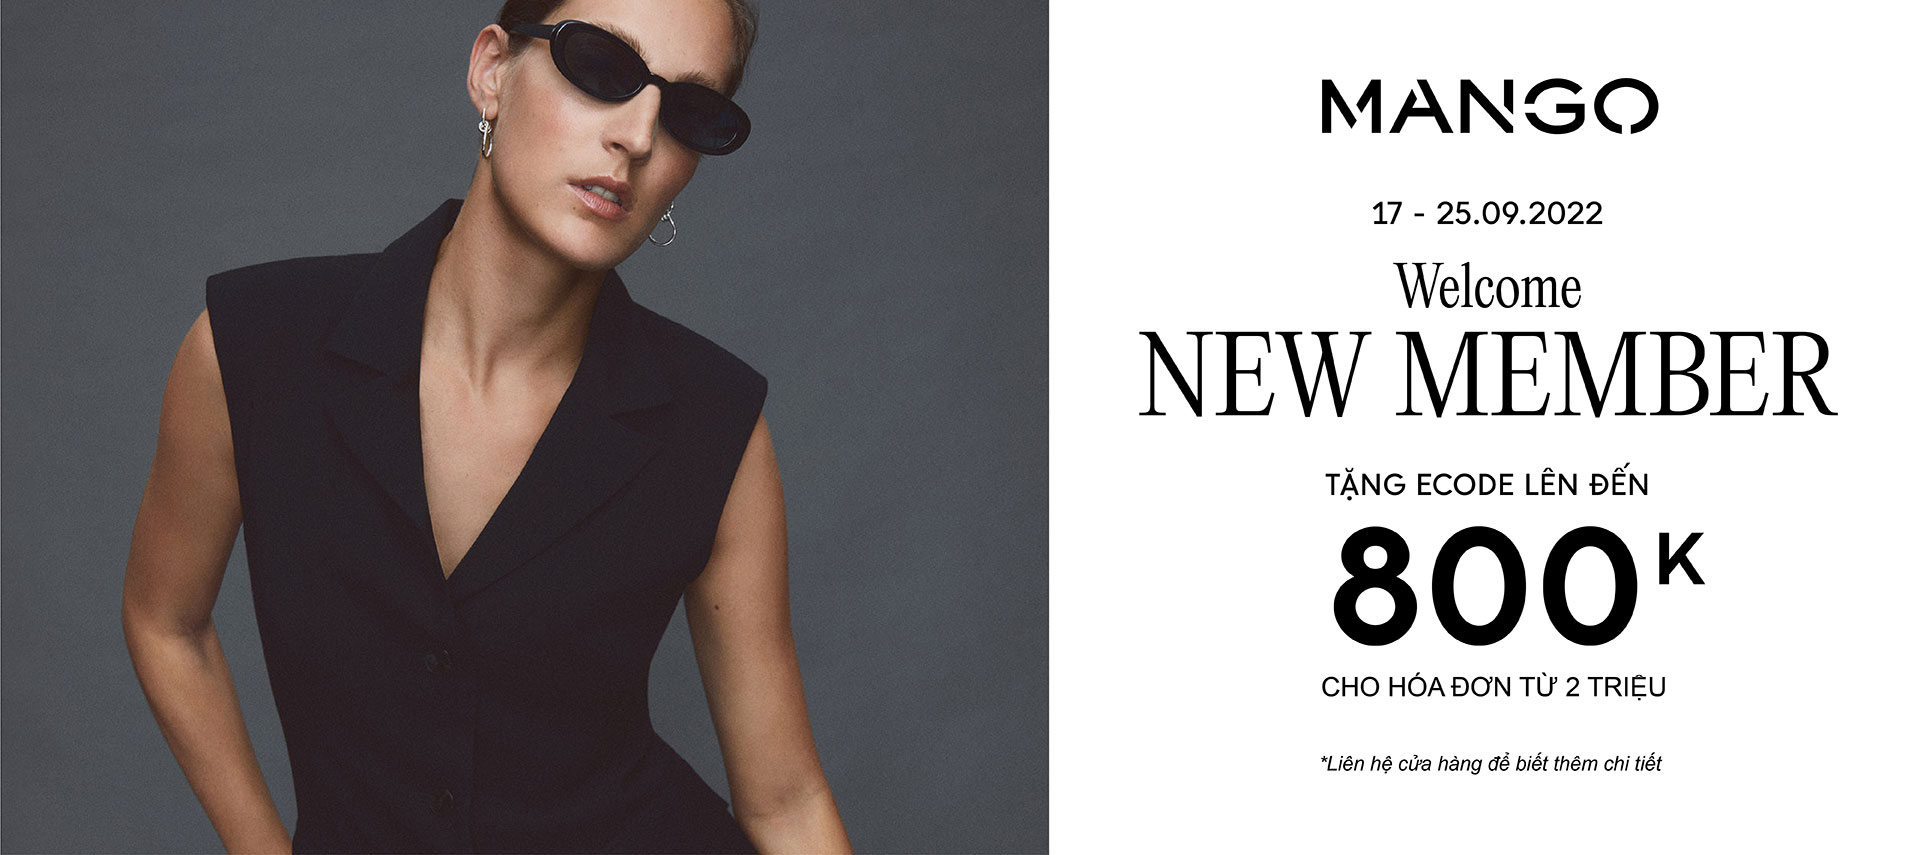 MANGO - WELCOME NEW MEMBER WITH SPECIAL OFFER UP TO 800K